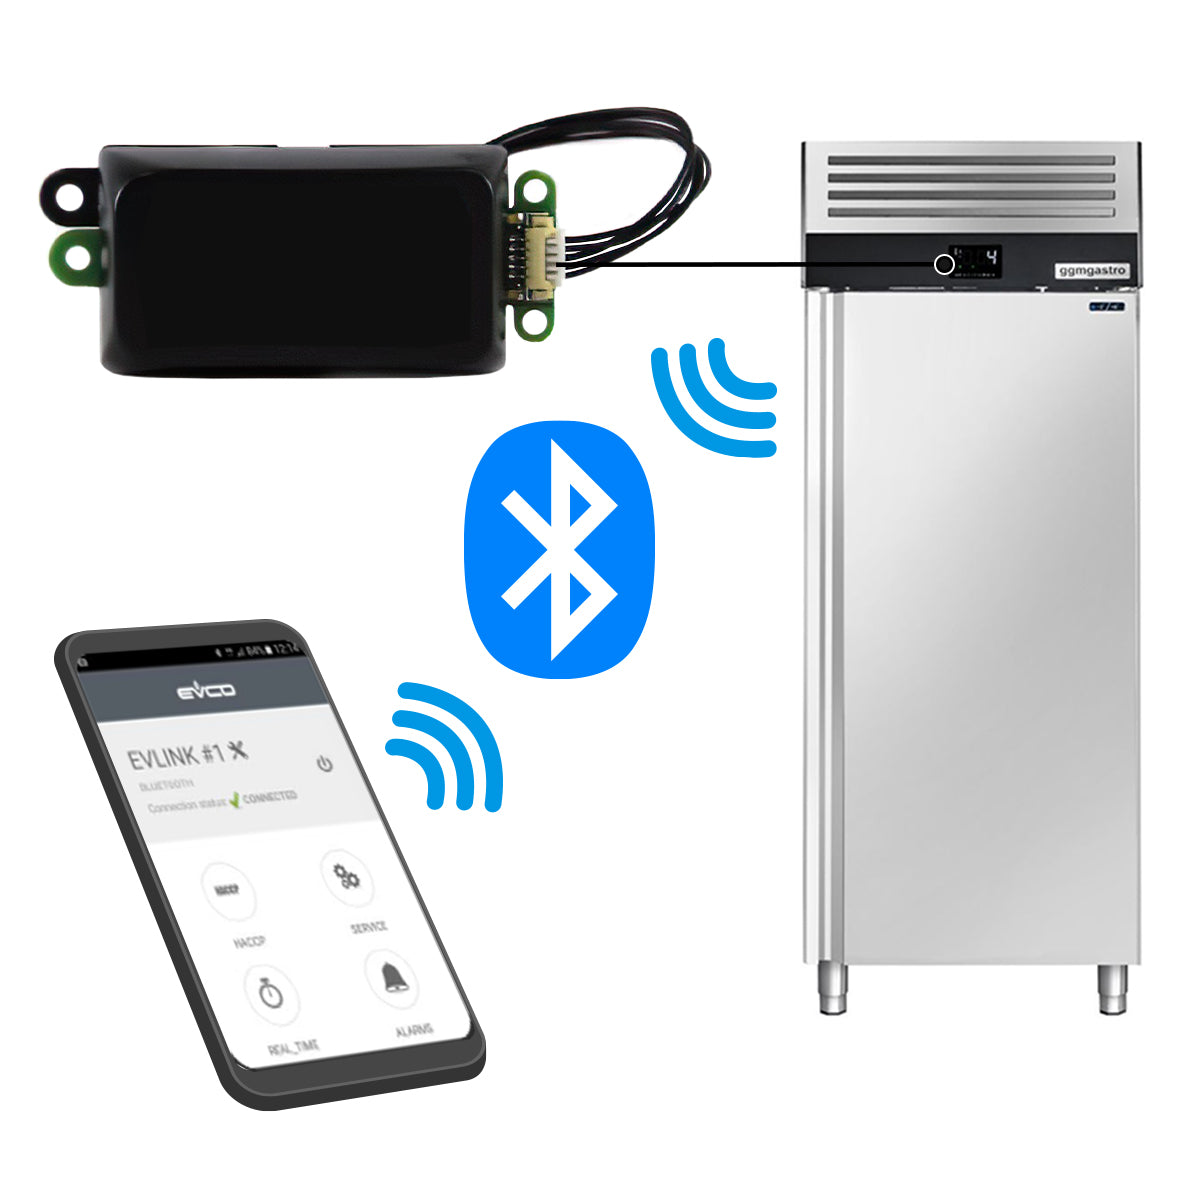 Bluetooth control for refrigerators and freezers